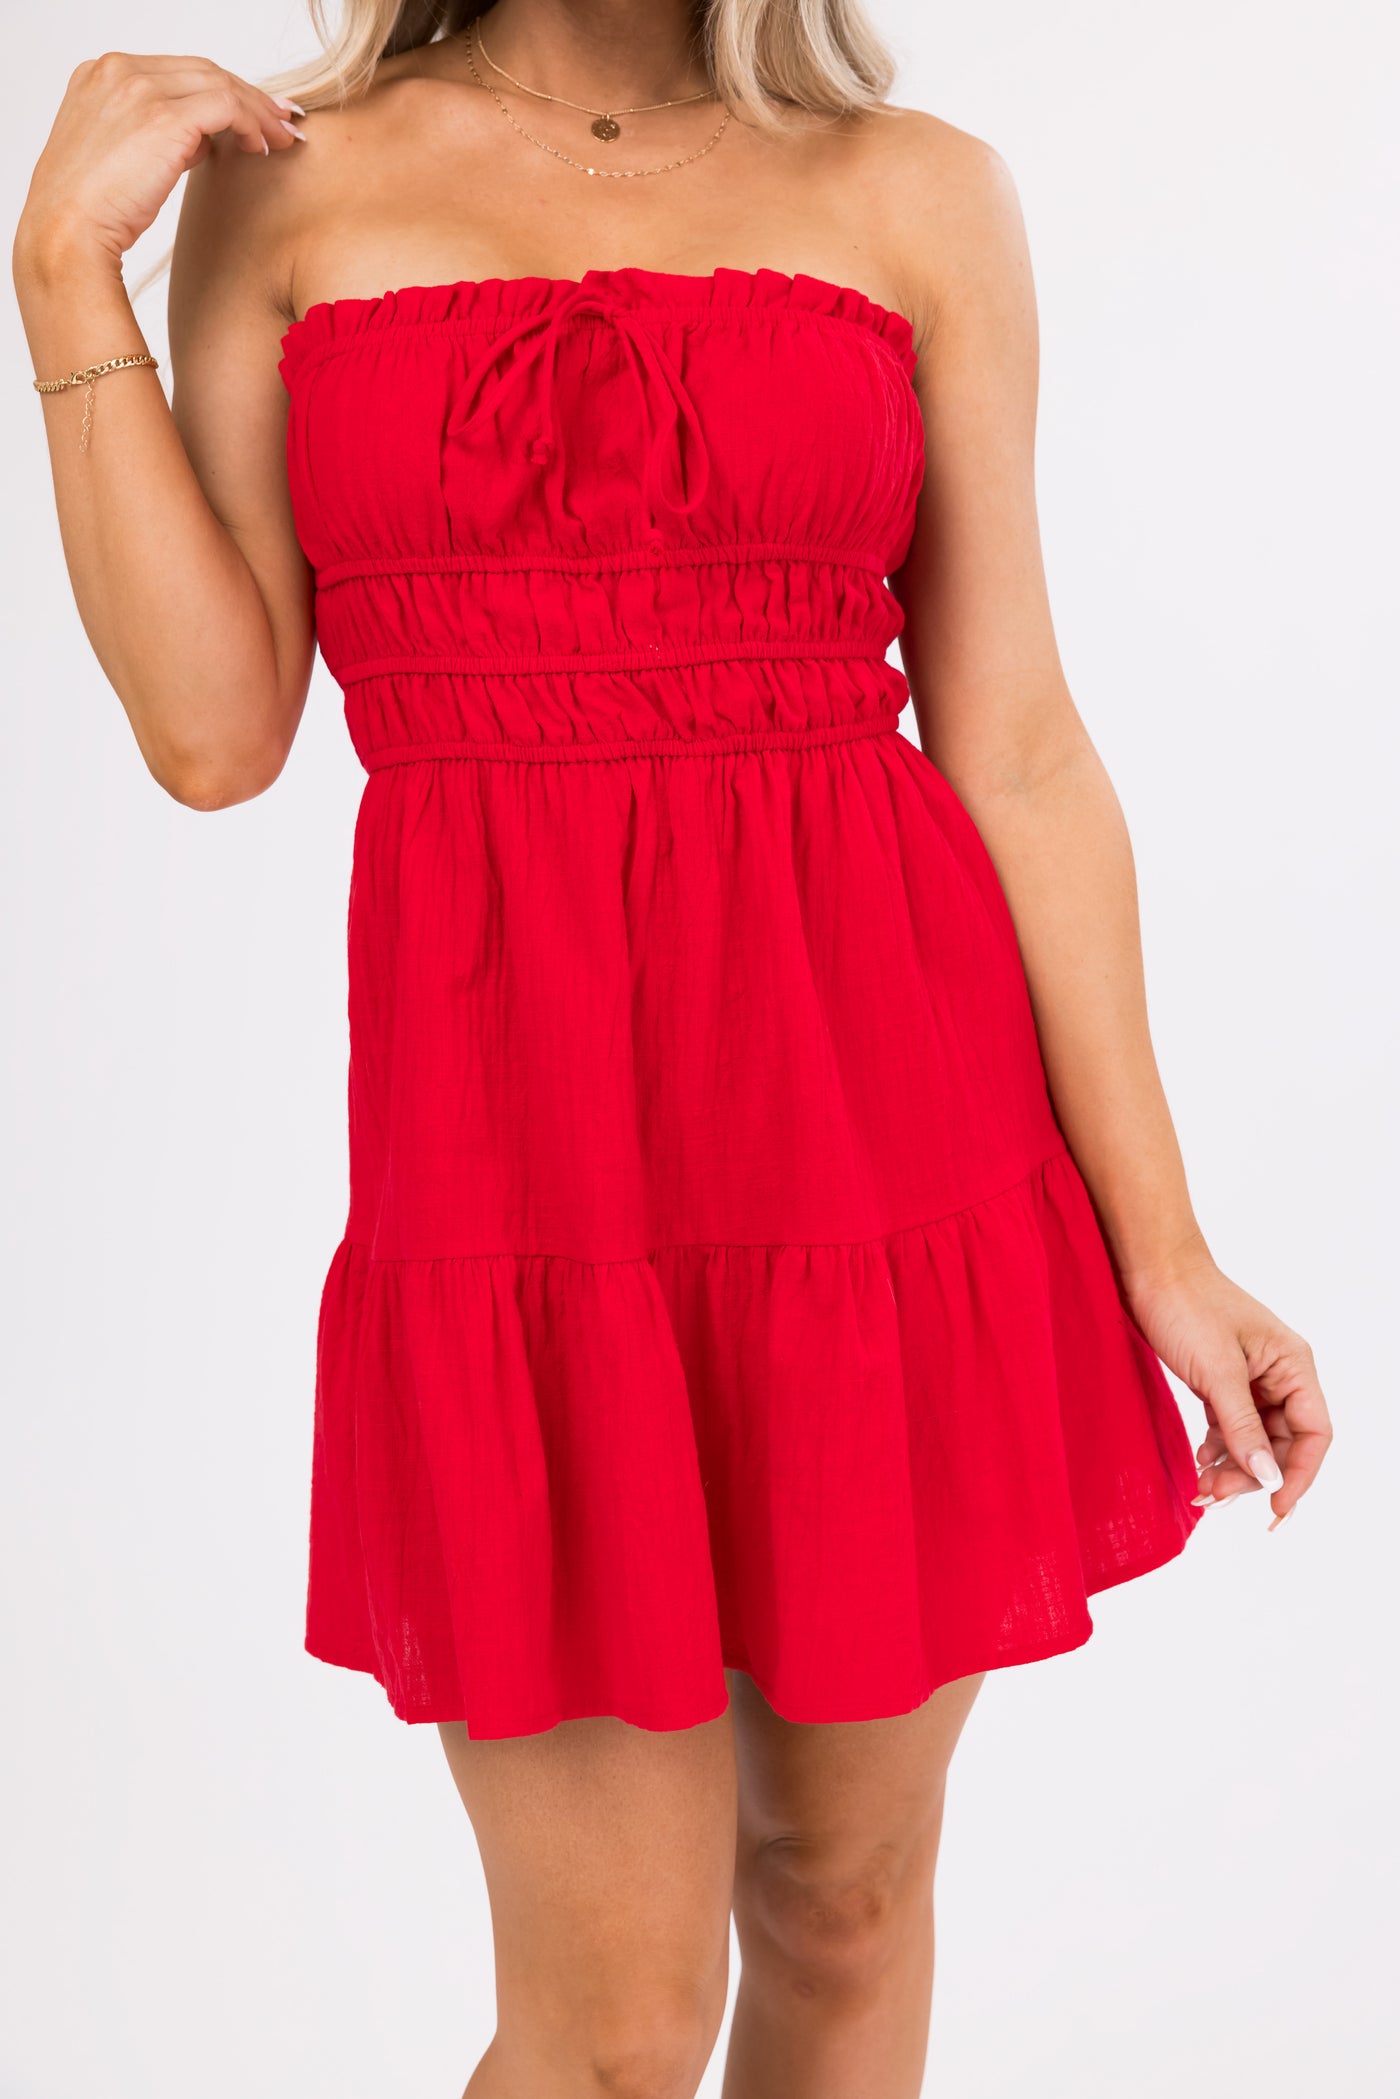 Candy Apple Red Strapless Mini Dress